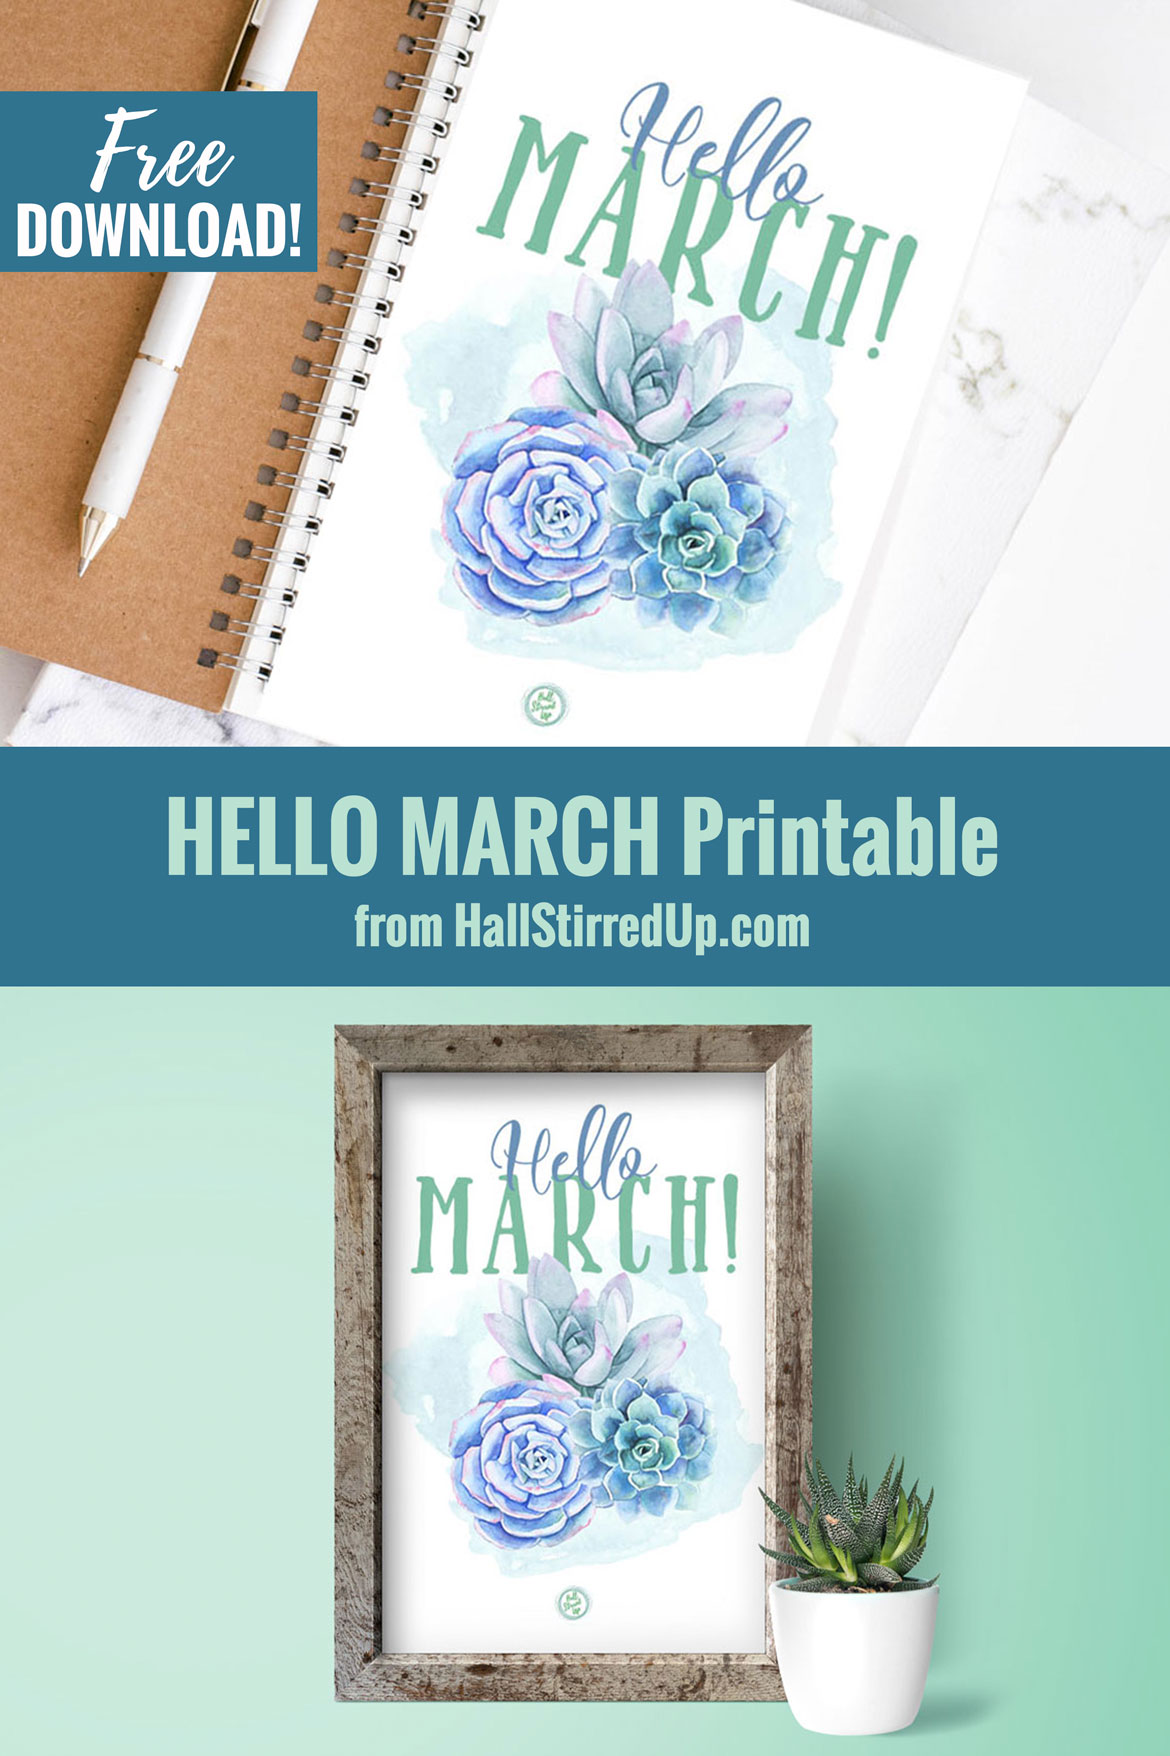 It's March and time for a pretty new printable